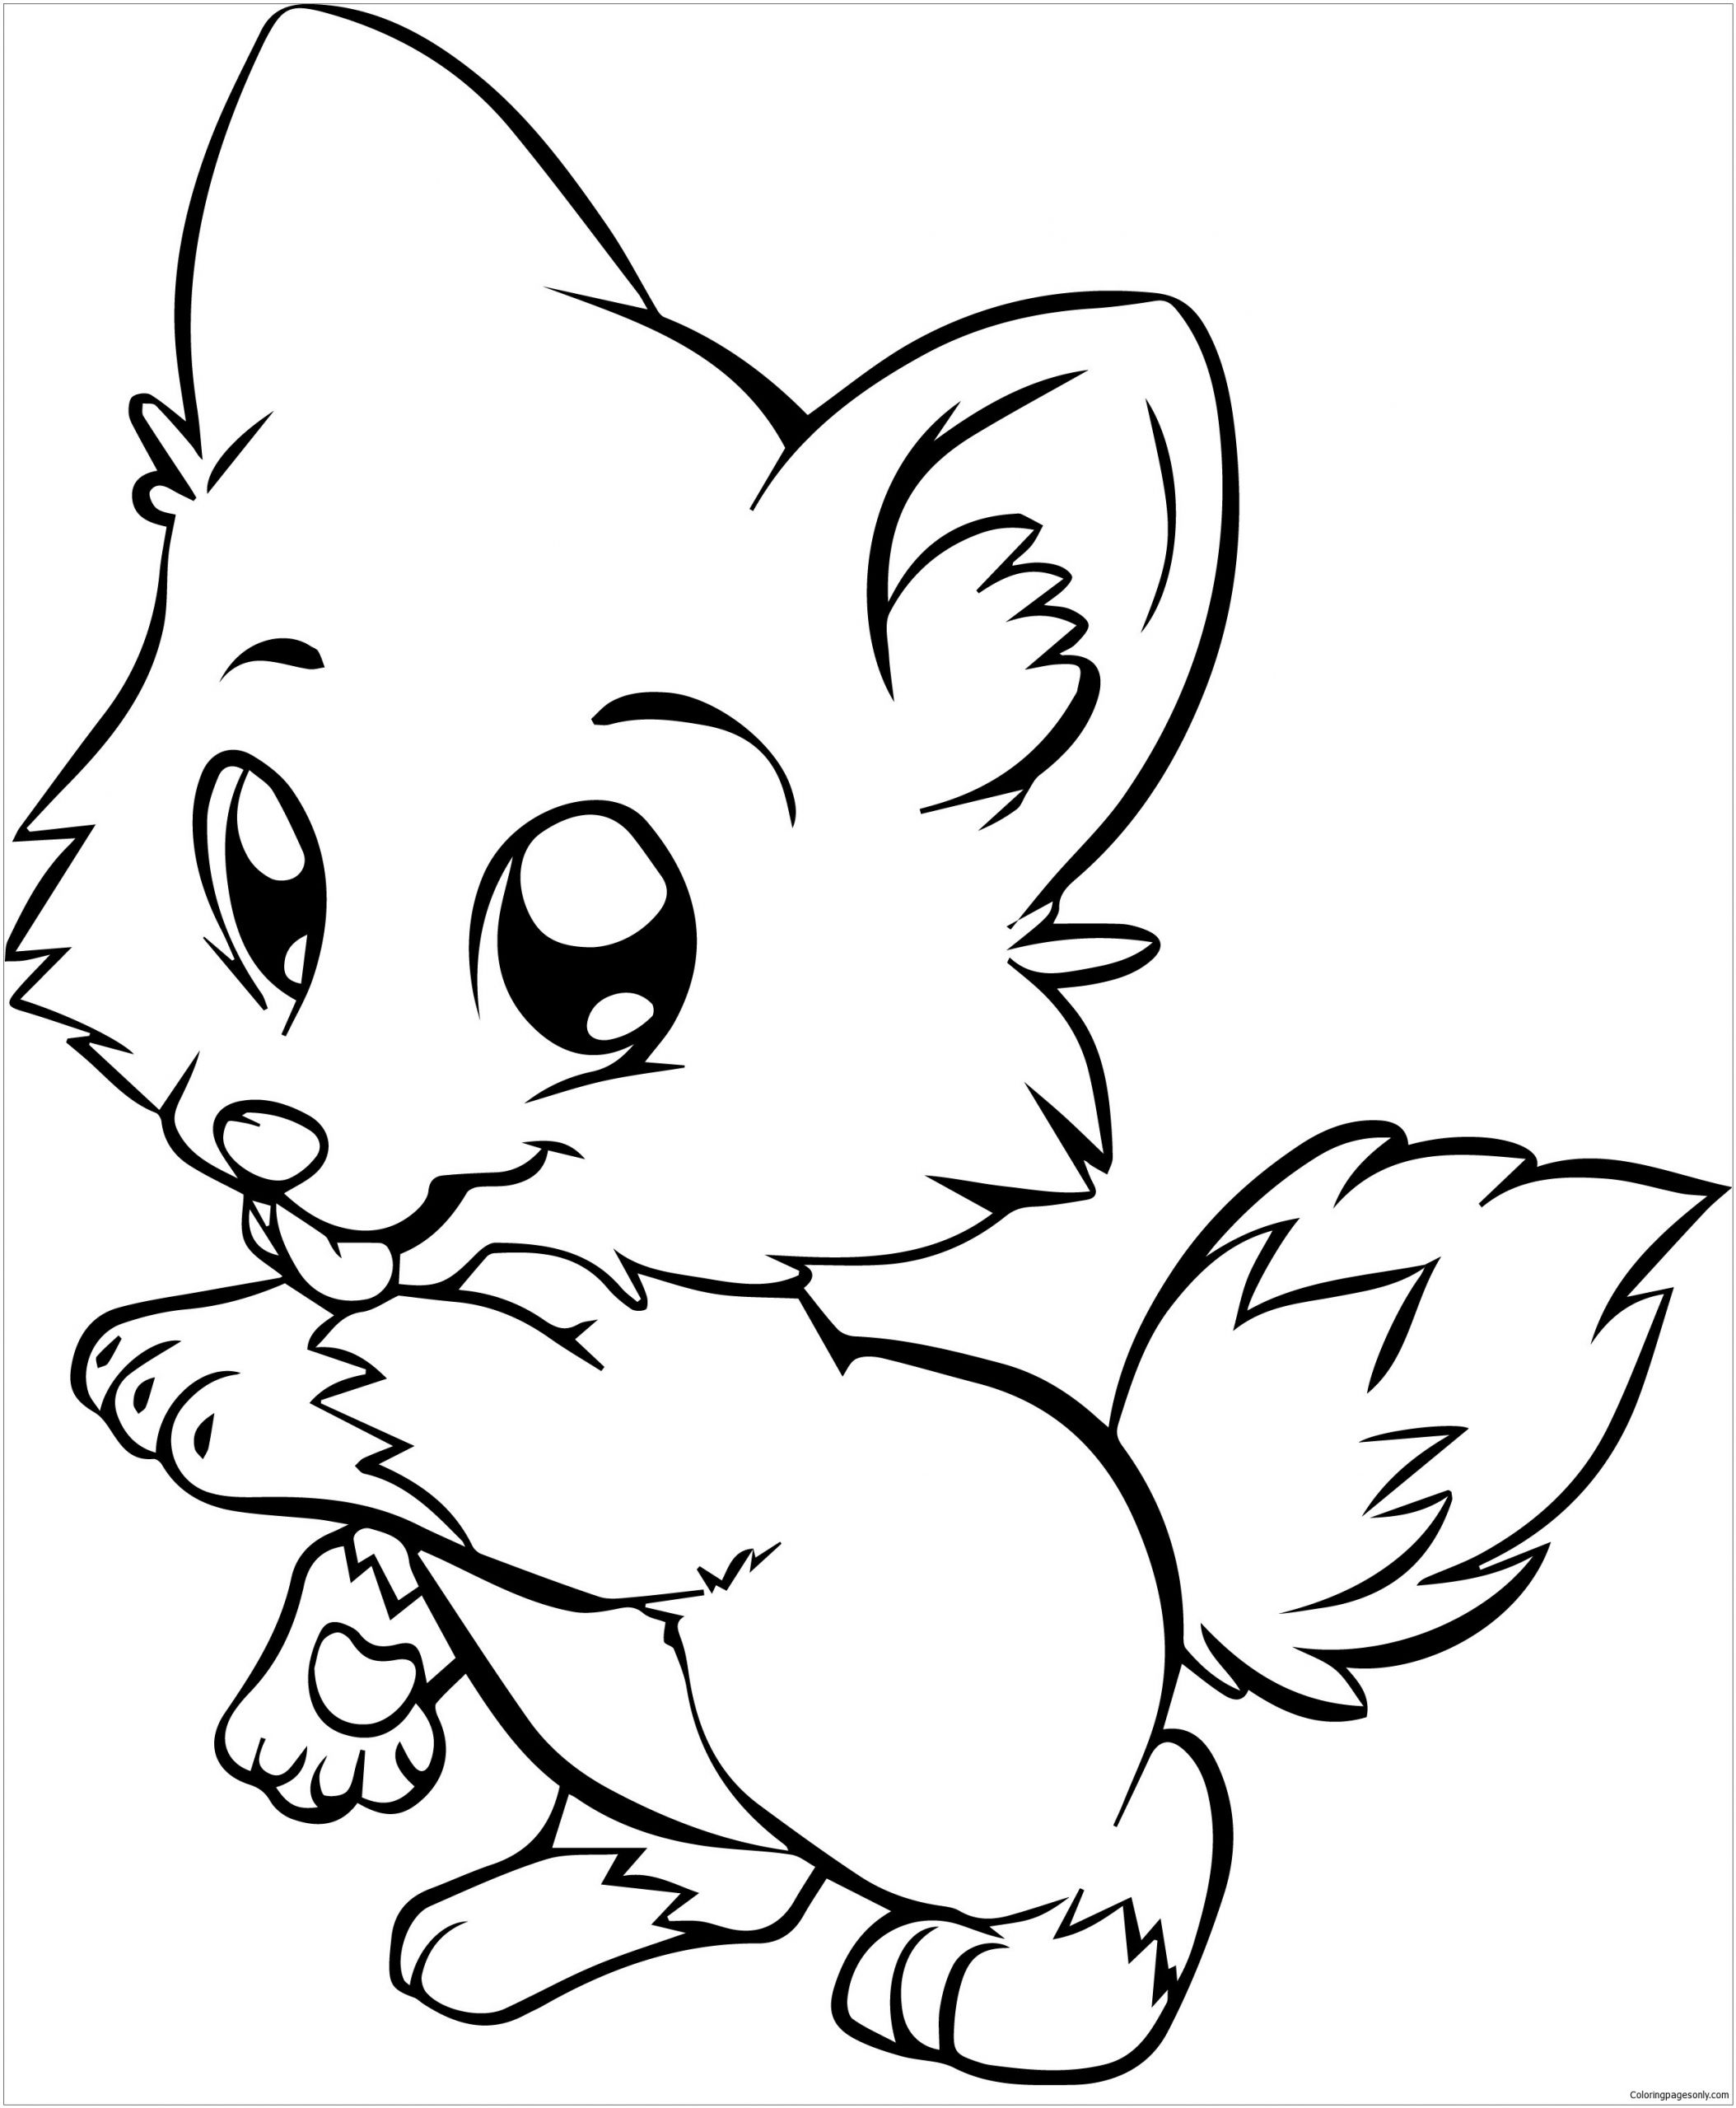 Baby Dog Coloring Pages
 Baby Dog Coloring Page Free Coloring Pages line